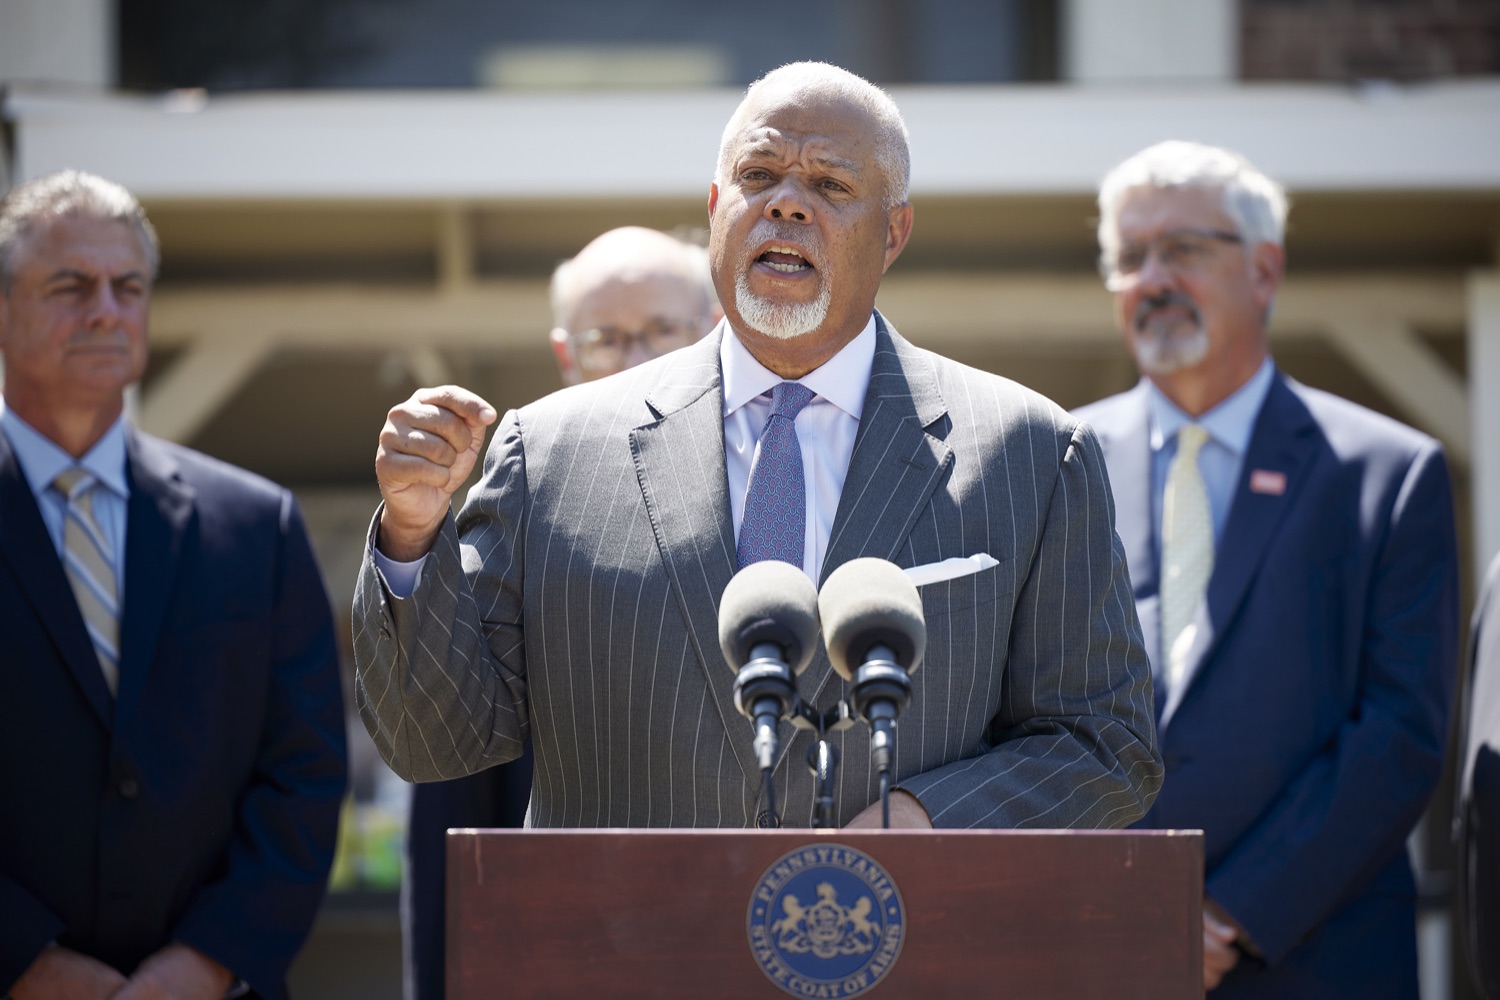 Senator Anthony Williams speaks with the press.   Governor Tom Wolf was joined by state Representative David Delloso and stakeholders and community members to discuss the reintroduction of the PA Opportunity Program, which would send $2,000 checks directly to Pennsylvanians. I first proposed the PA Opportunity Program back in February, but Republican leaders in the General Assembly just wouldnt get on board with funding it in this years budget, said Gov. Wolf. However, as Ive traveled the commonwealth, Ive heard directly from so many people about how much this program would mean to them and their families. Im not going to stop fighting until the people of Pennsylvania get the help they need and deserve. Folcroft, PA  August 2, 2022<br><a href="https://filesource.amperwave.net/commonwealthofpa/photo/22070_gov_opportunityFund_dz_012.JPG" target="_blank">⇣ Download Photo</a>